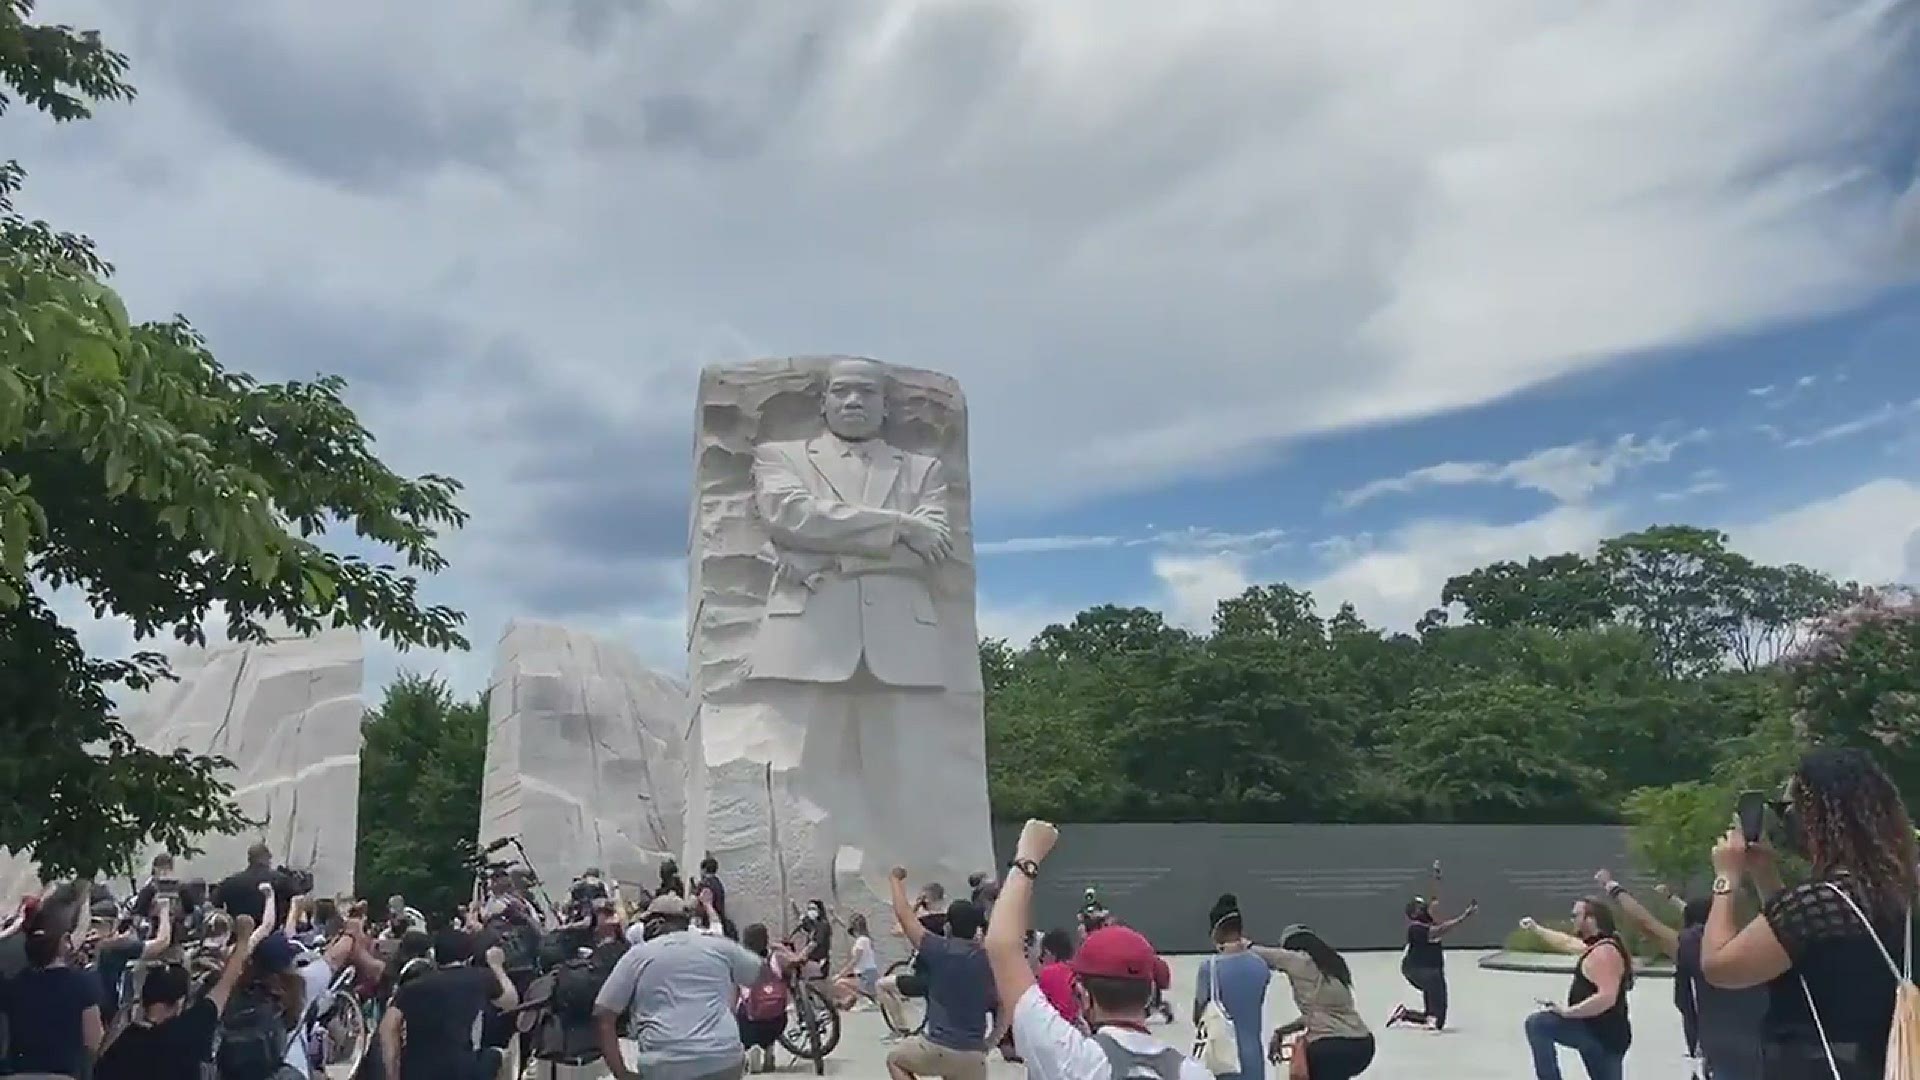 2:19 p.m. -- In front of the Martin Luther King Jr. Memorial, dozens take an 8 minute and 46 second moment of silence in remembrance of George Floyd.